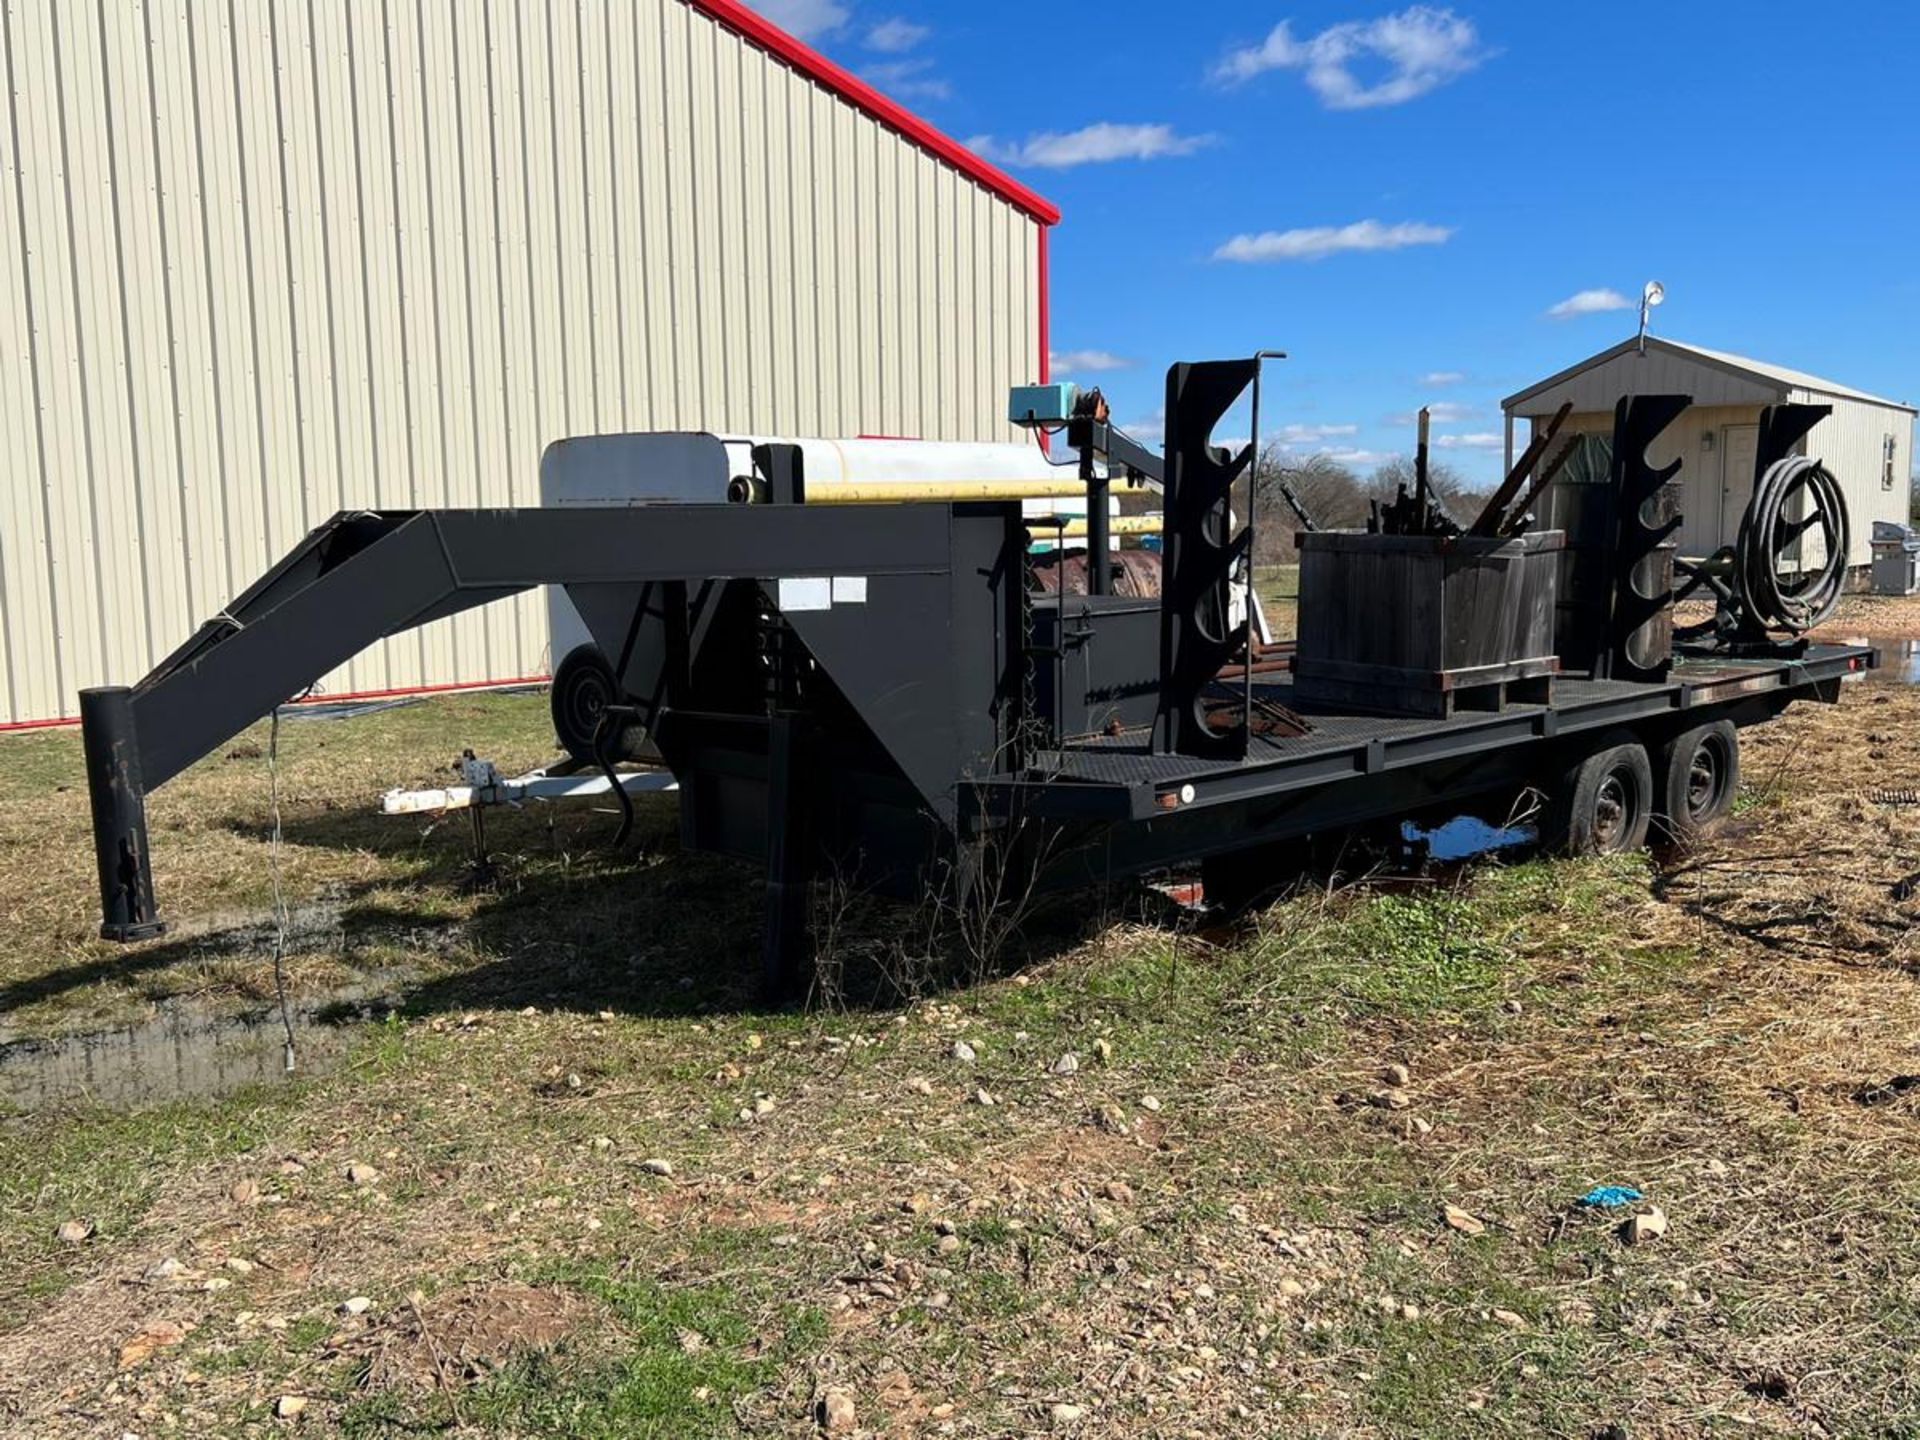 9760 Approx. 20' L x 8' W Goose Neck Trailer